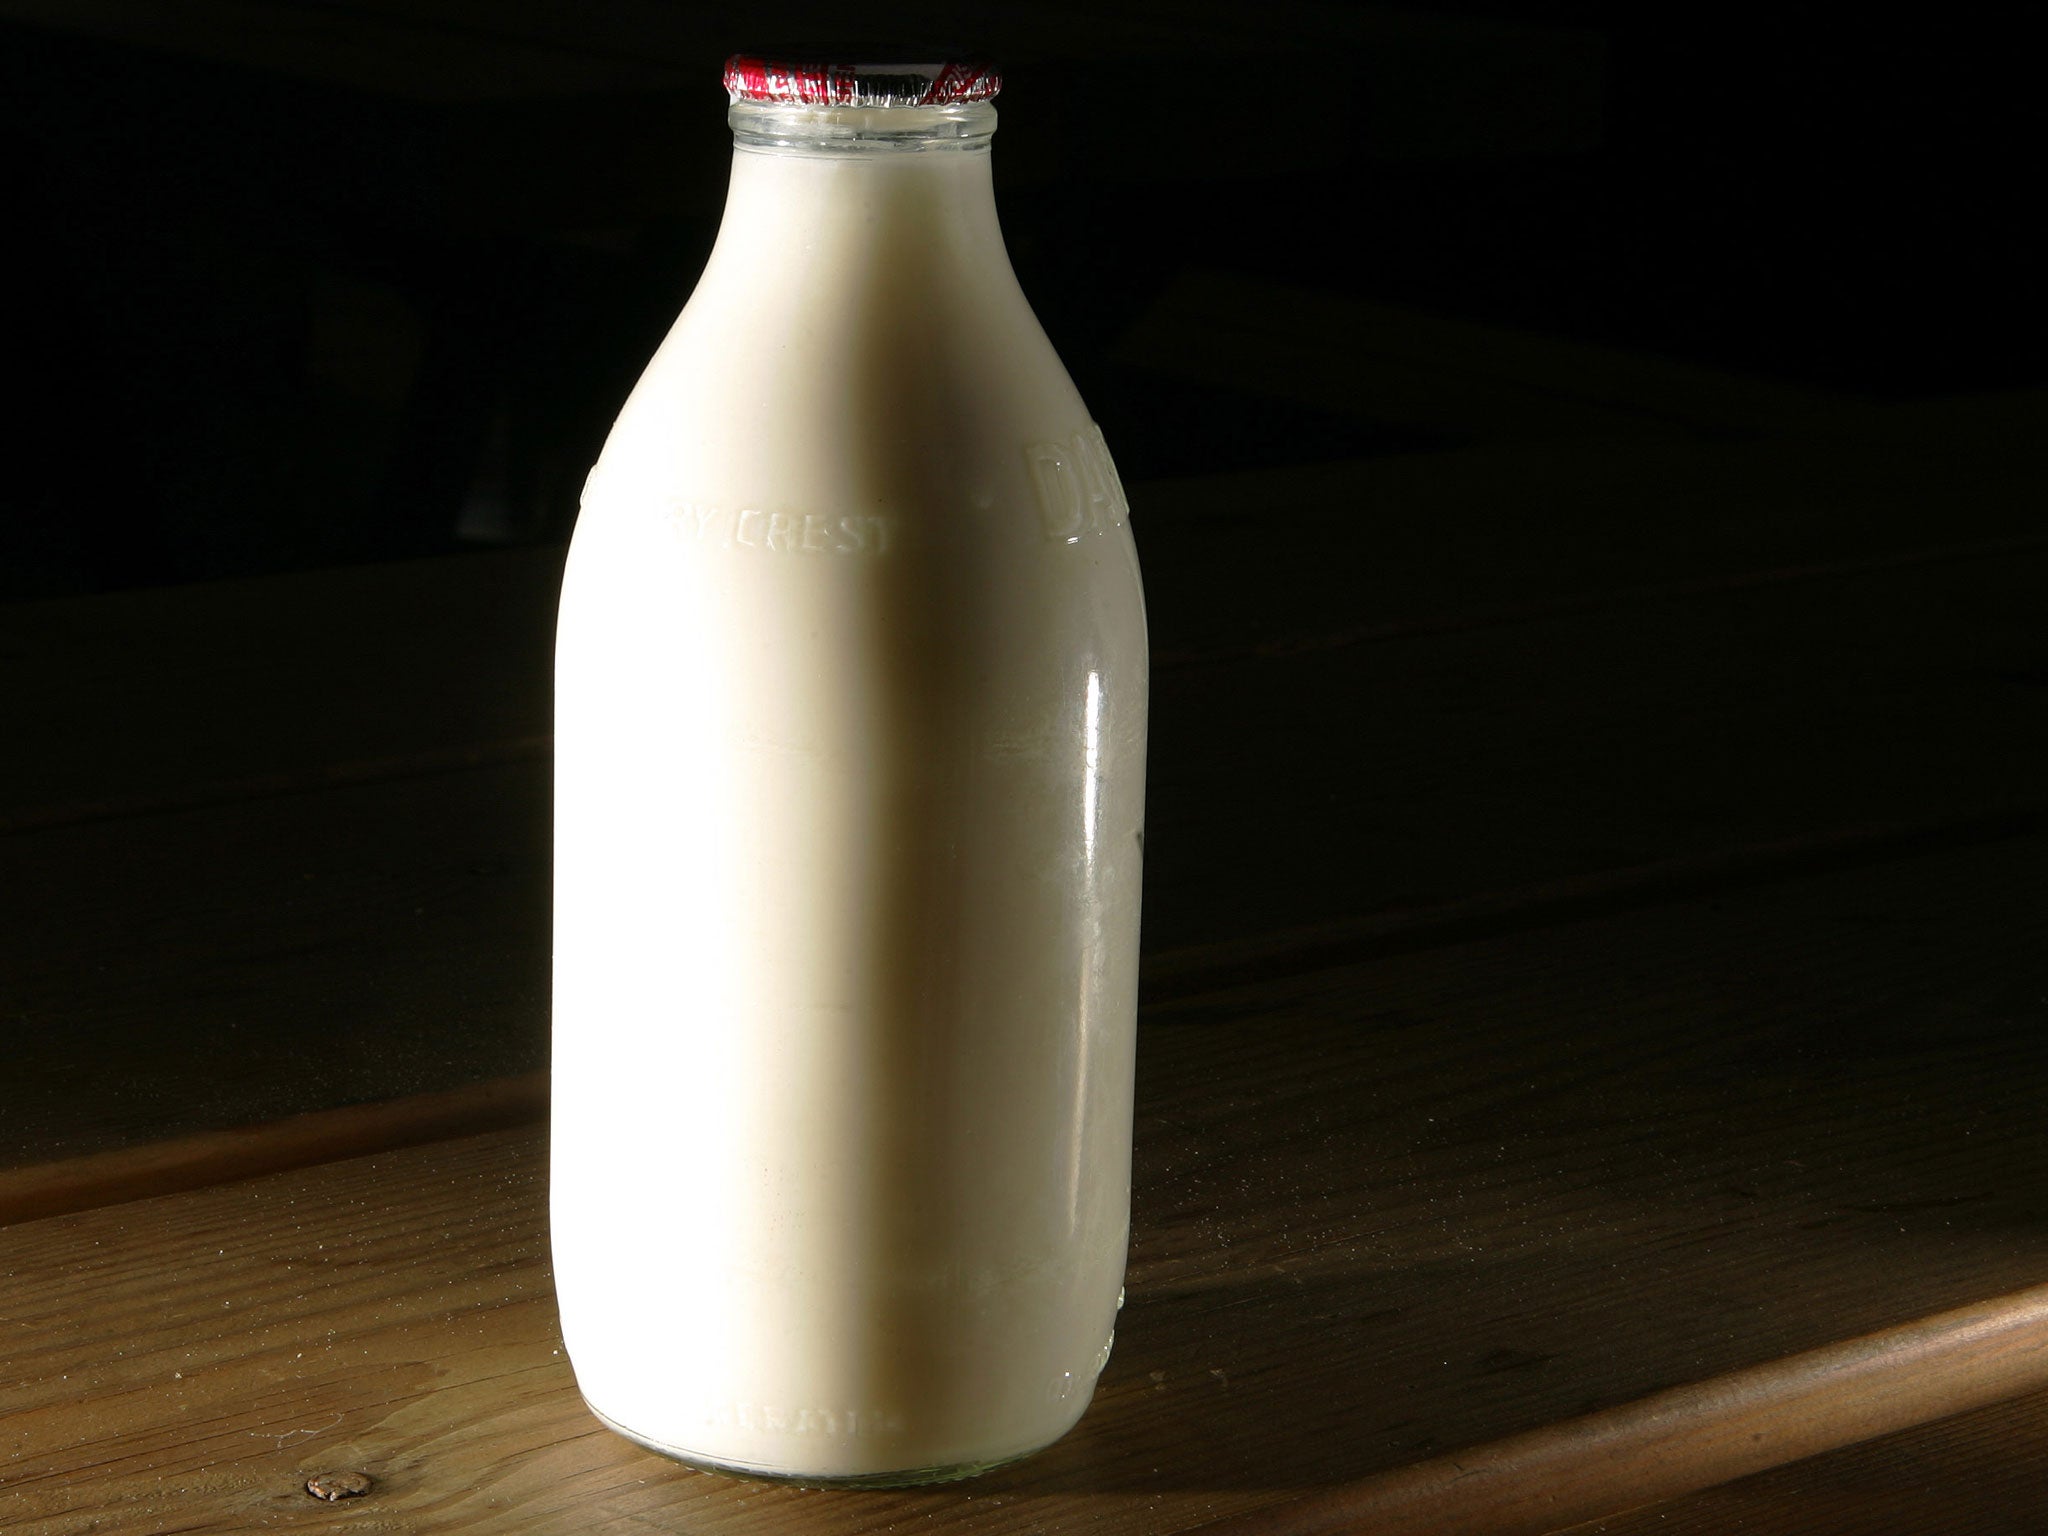 Milk is among the drinks that have been doctored by criminal gangs